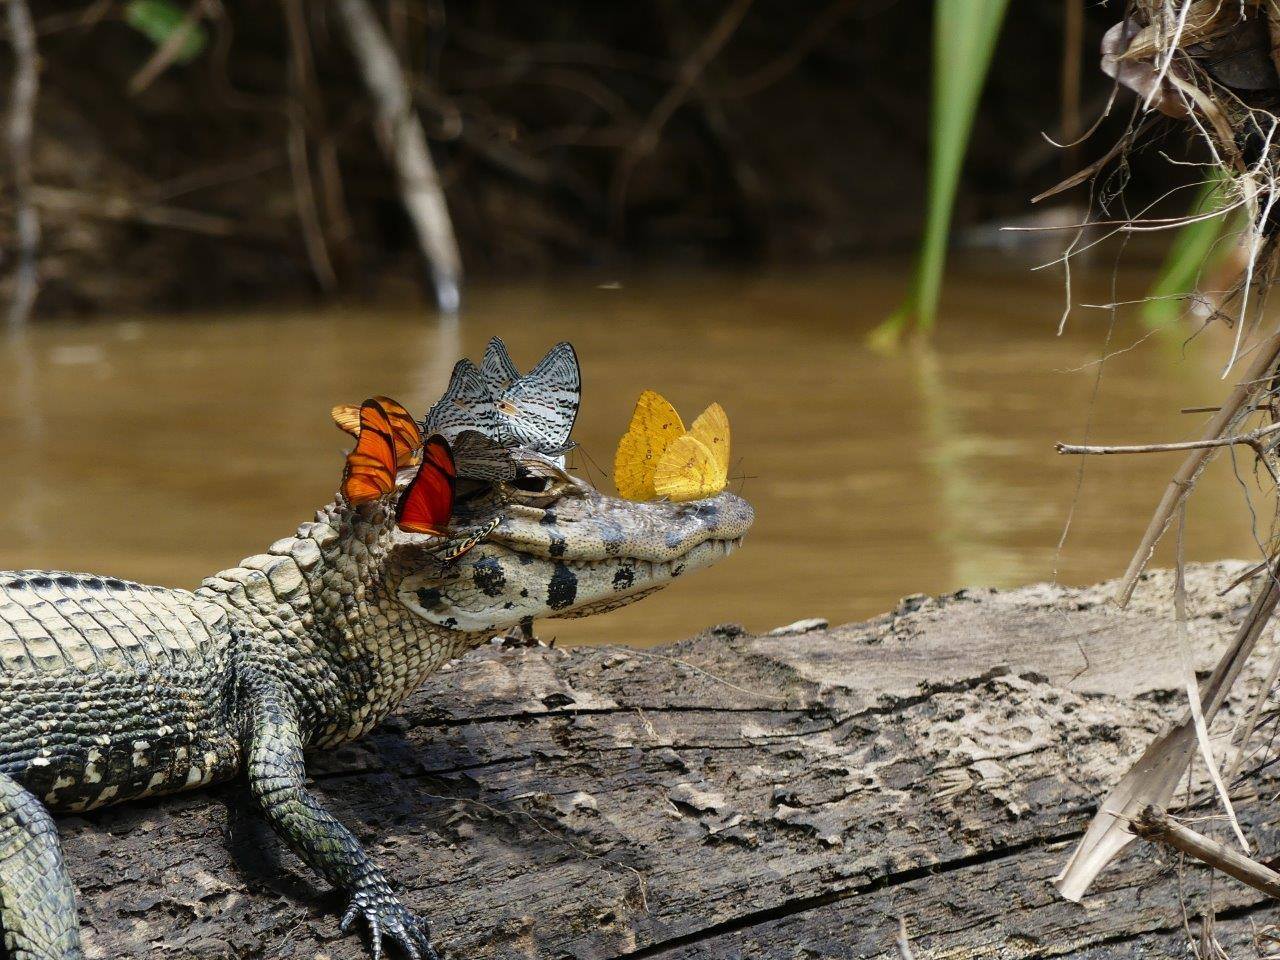 In the Amazon, butterflies are known to drink the tears of caimans and turtles.